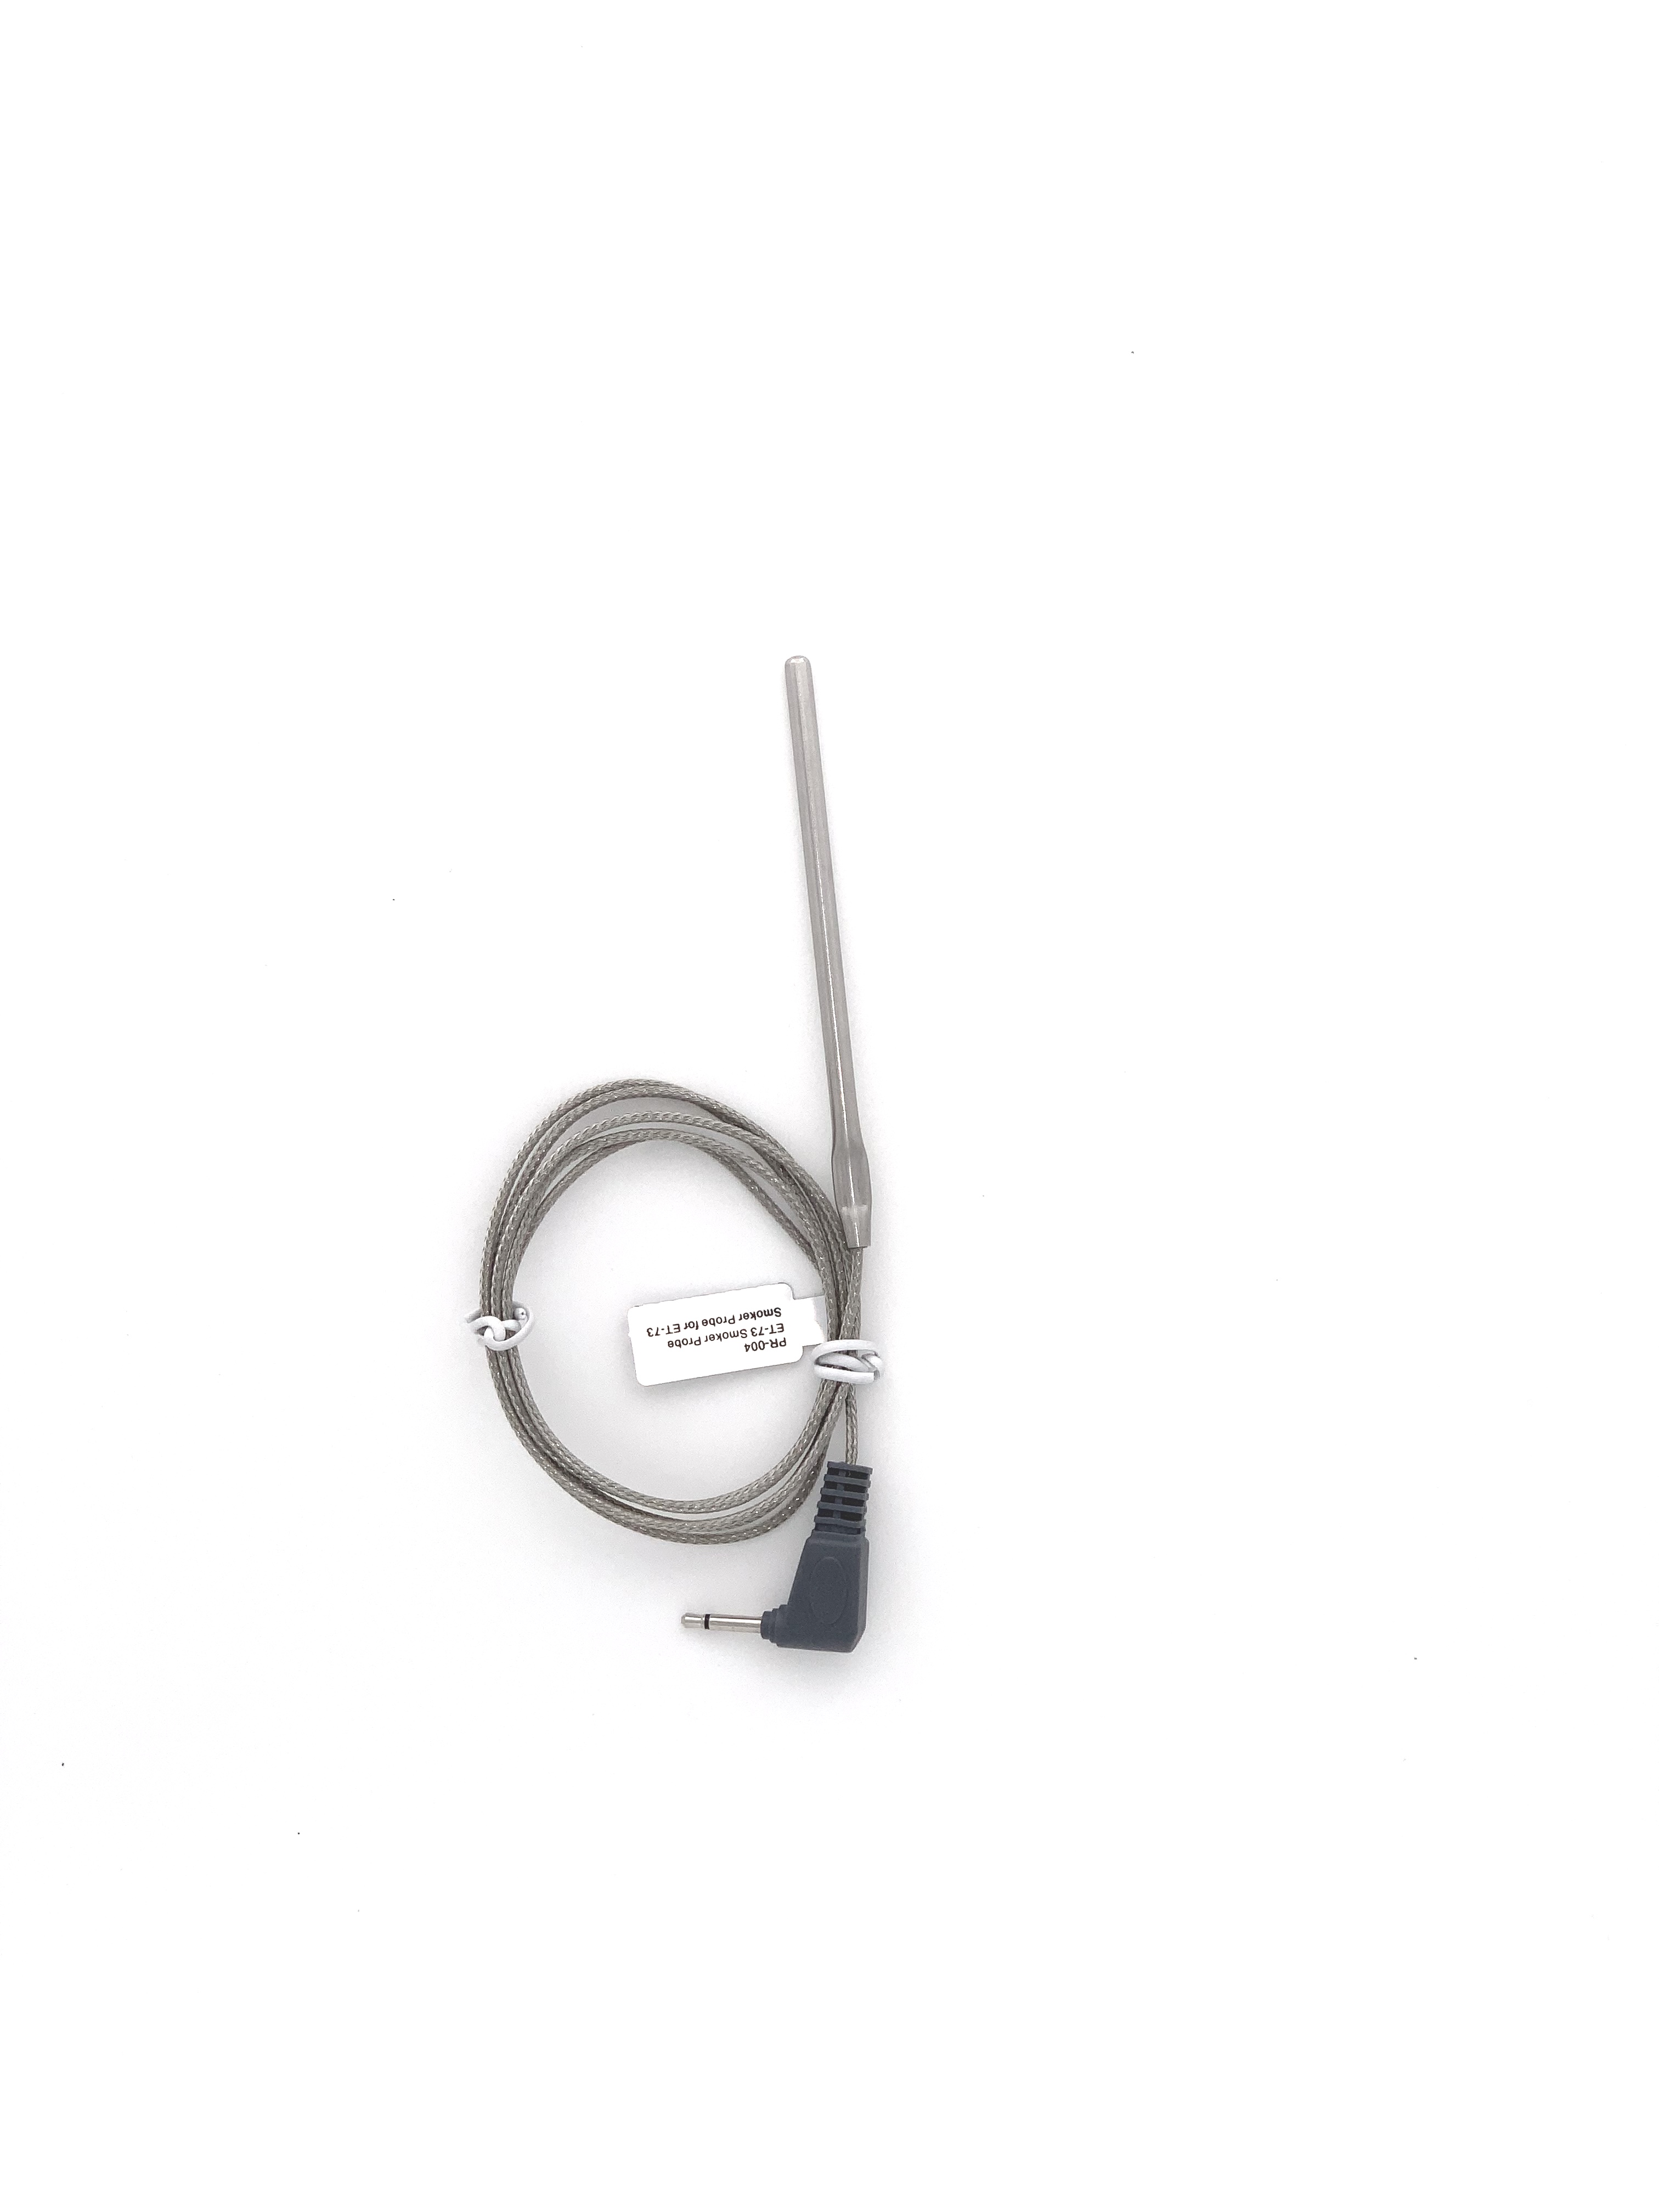 PR-004: 3-Foot BBQ Probe  Maverick Thermometers Replacement Parts